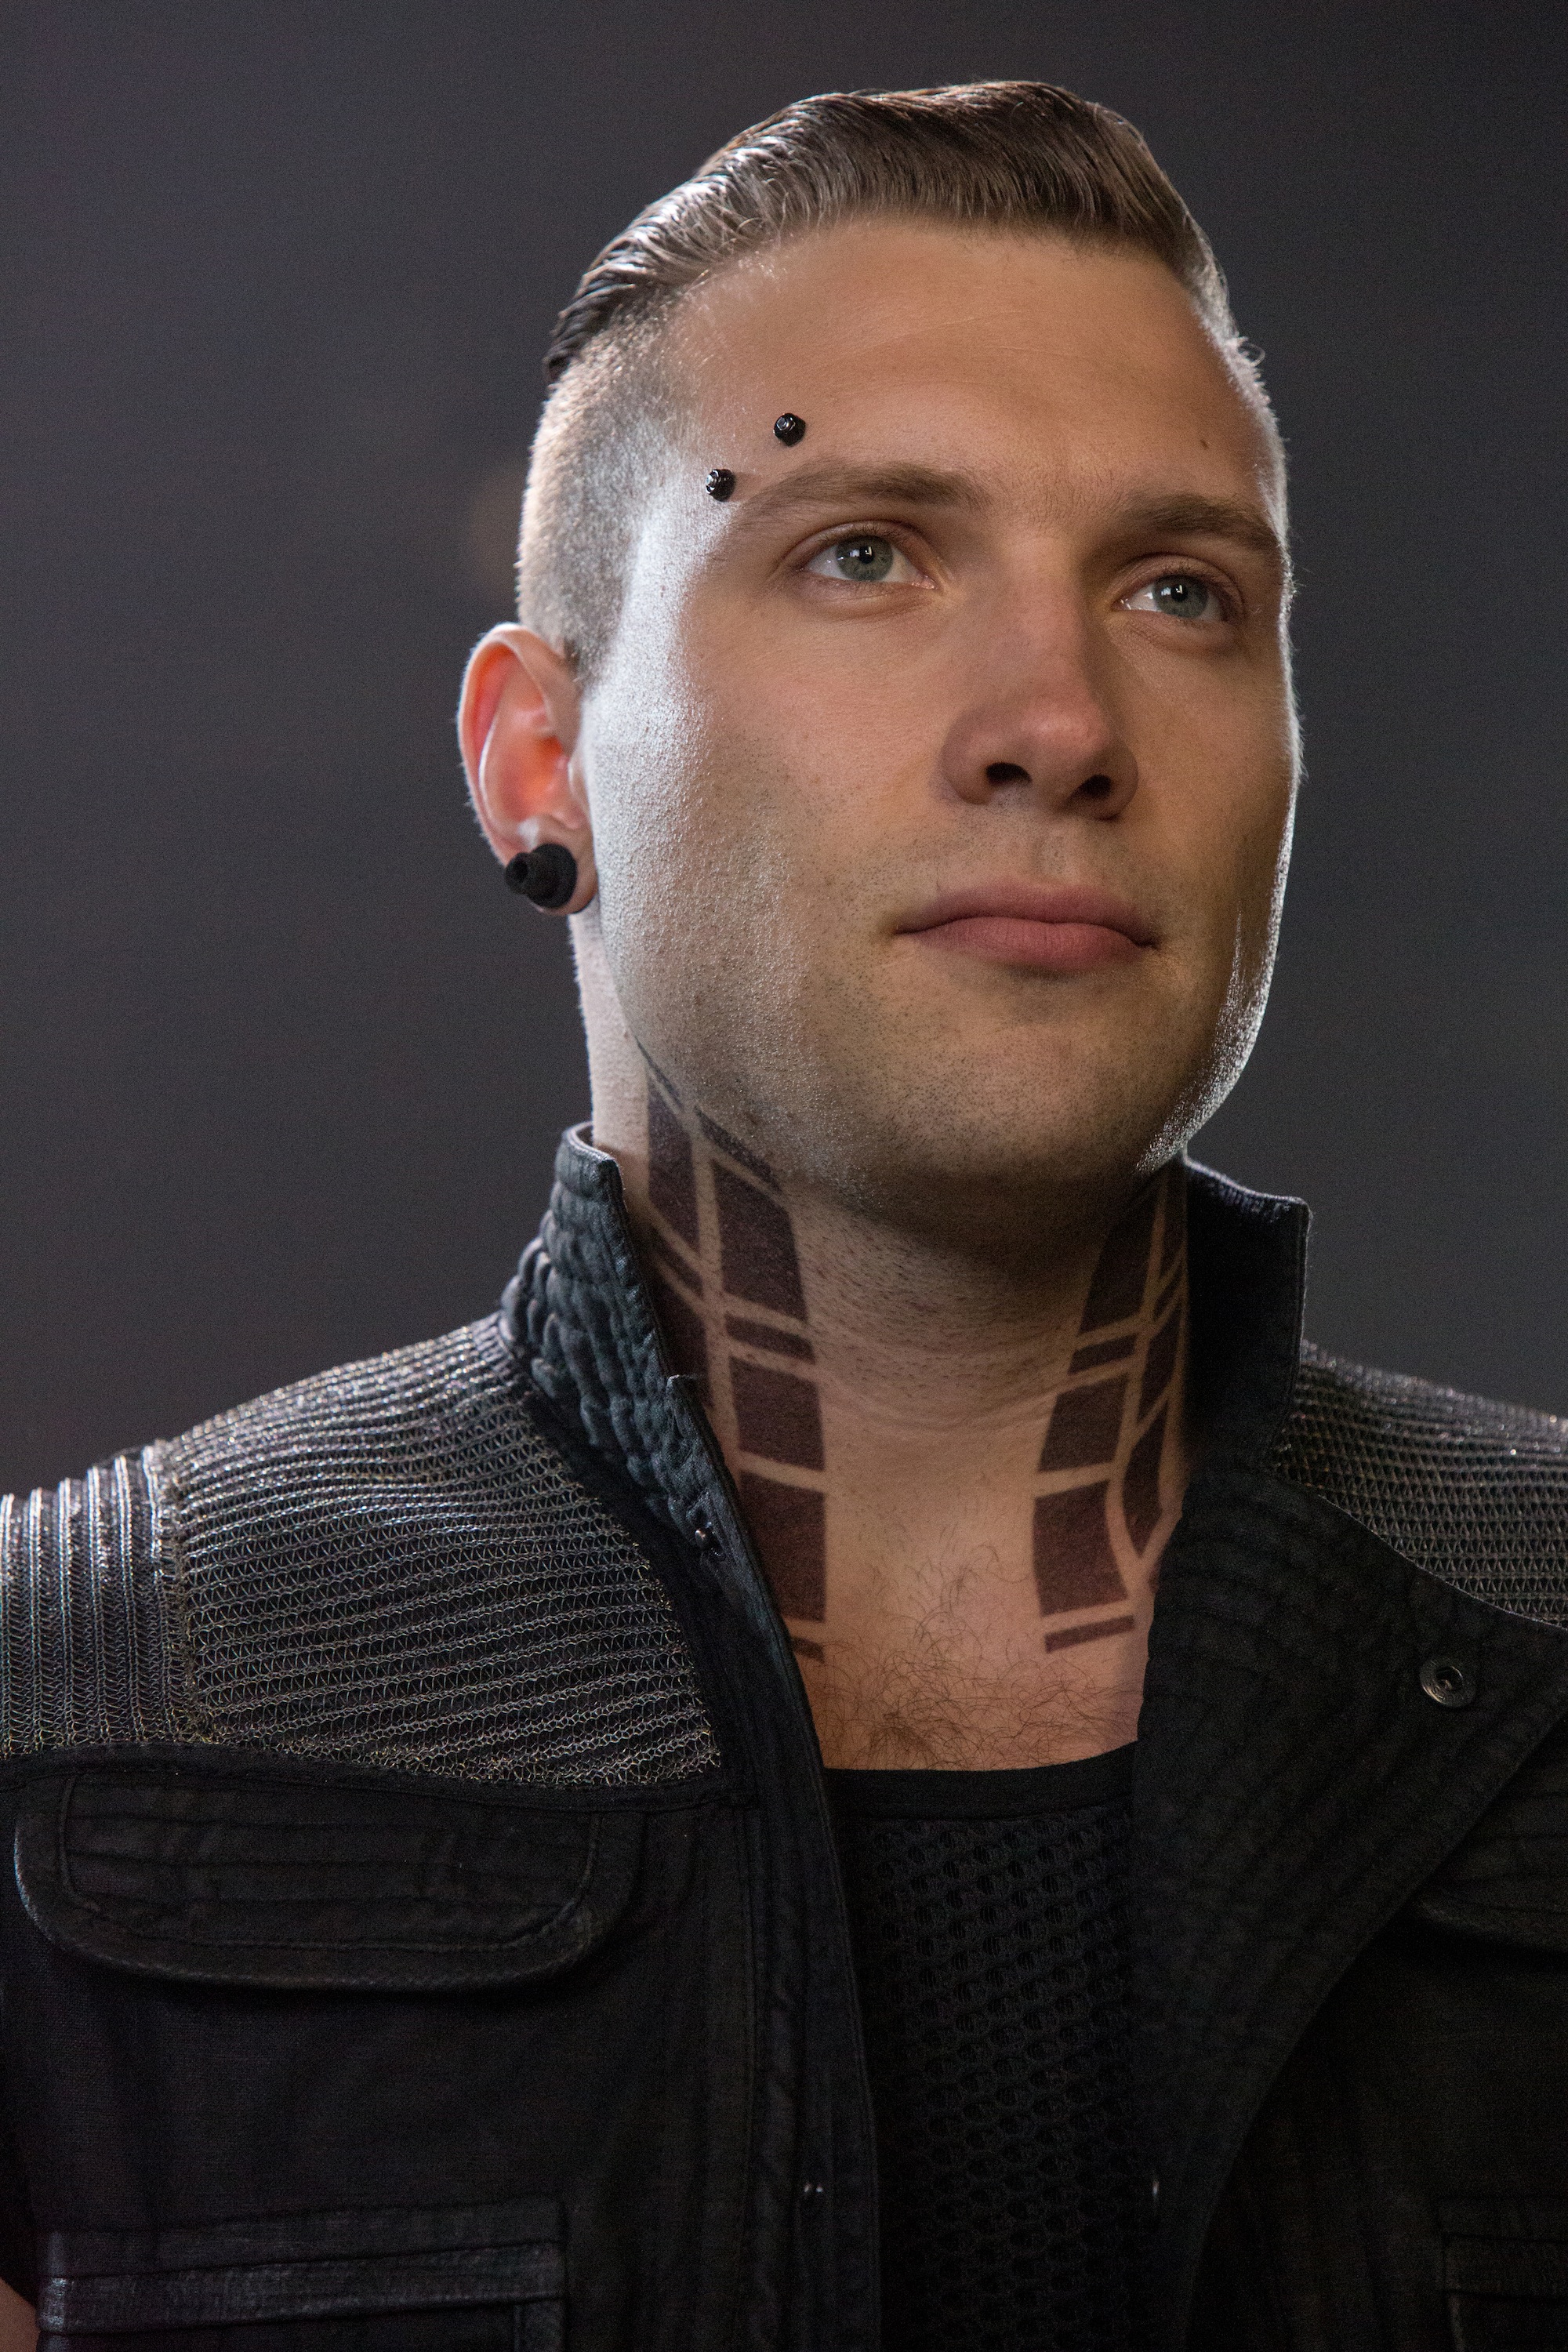 As Eric, Jai Courtney makes eyebrow piercings actually look cool. [Summit Entertainment via DivergentFaction]